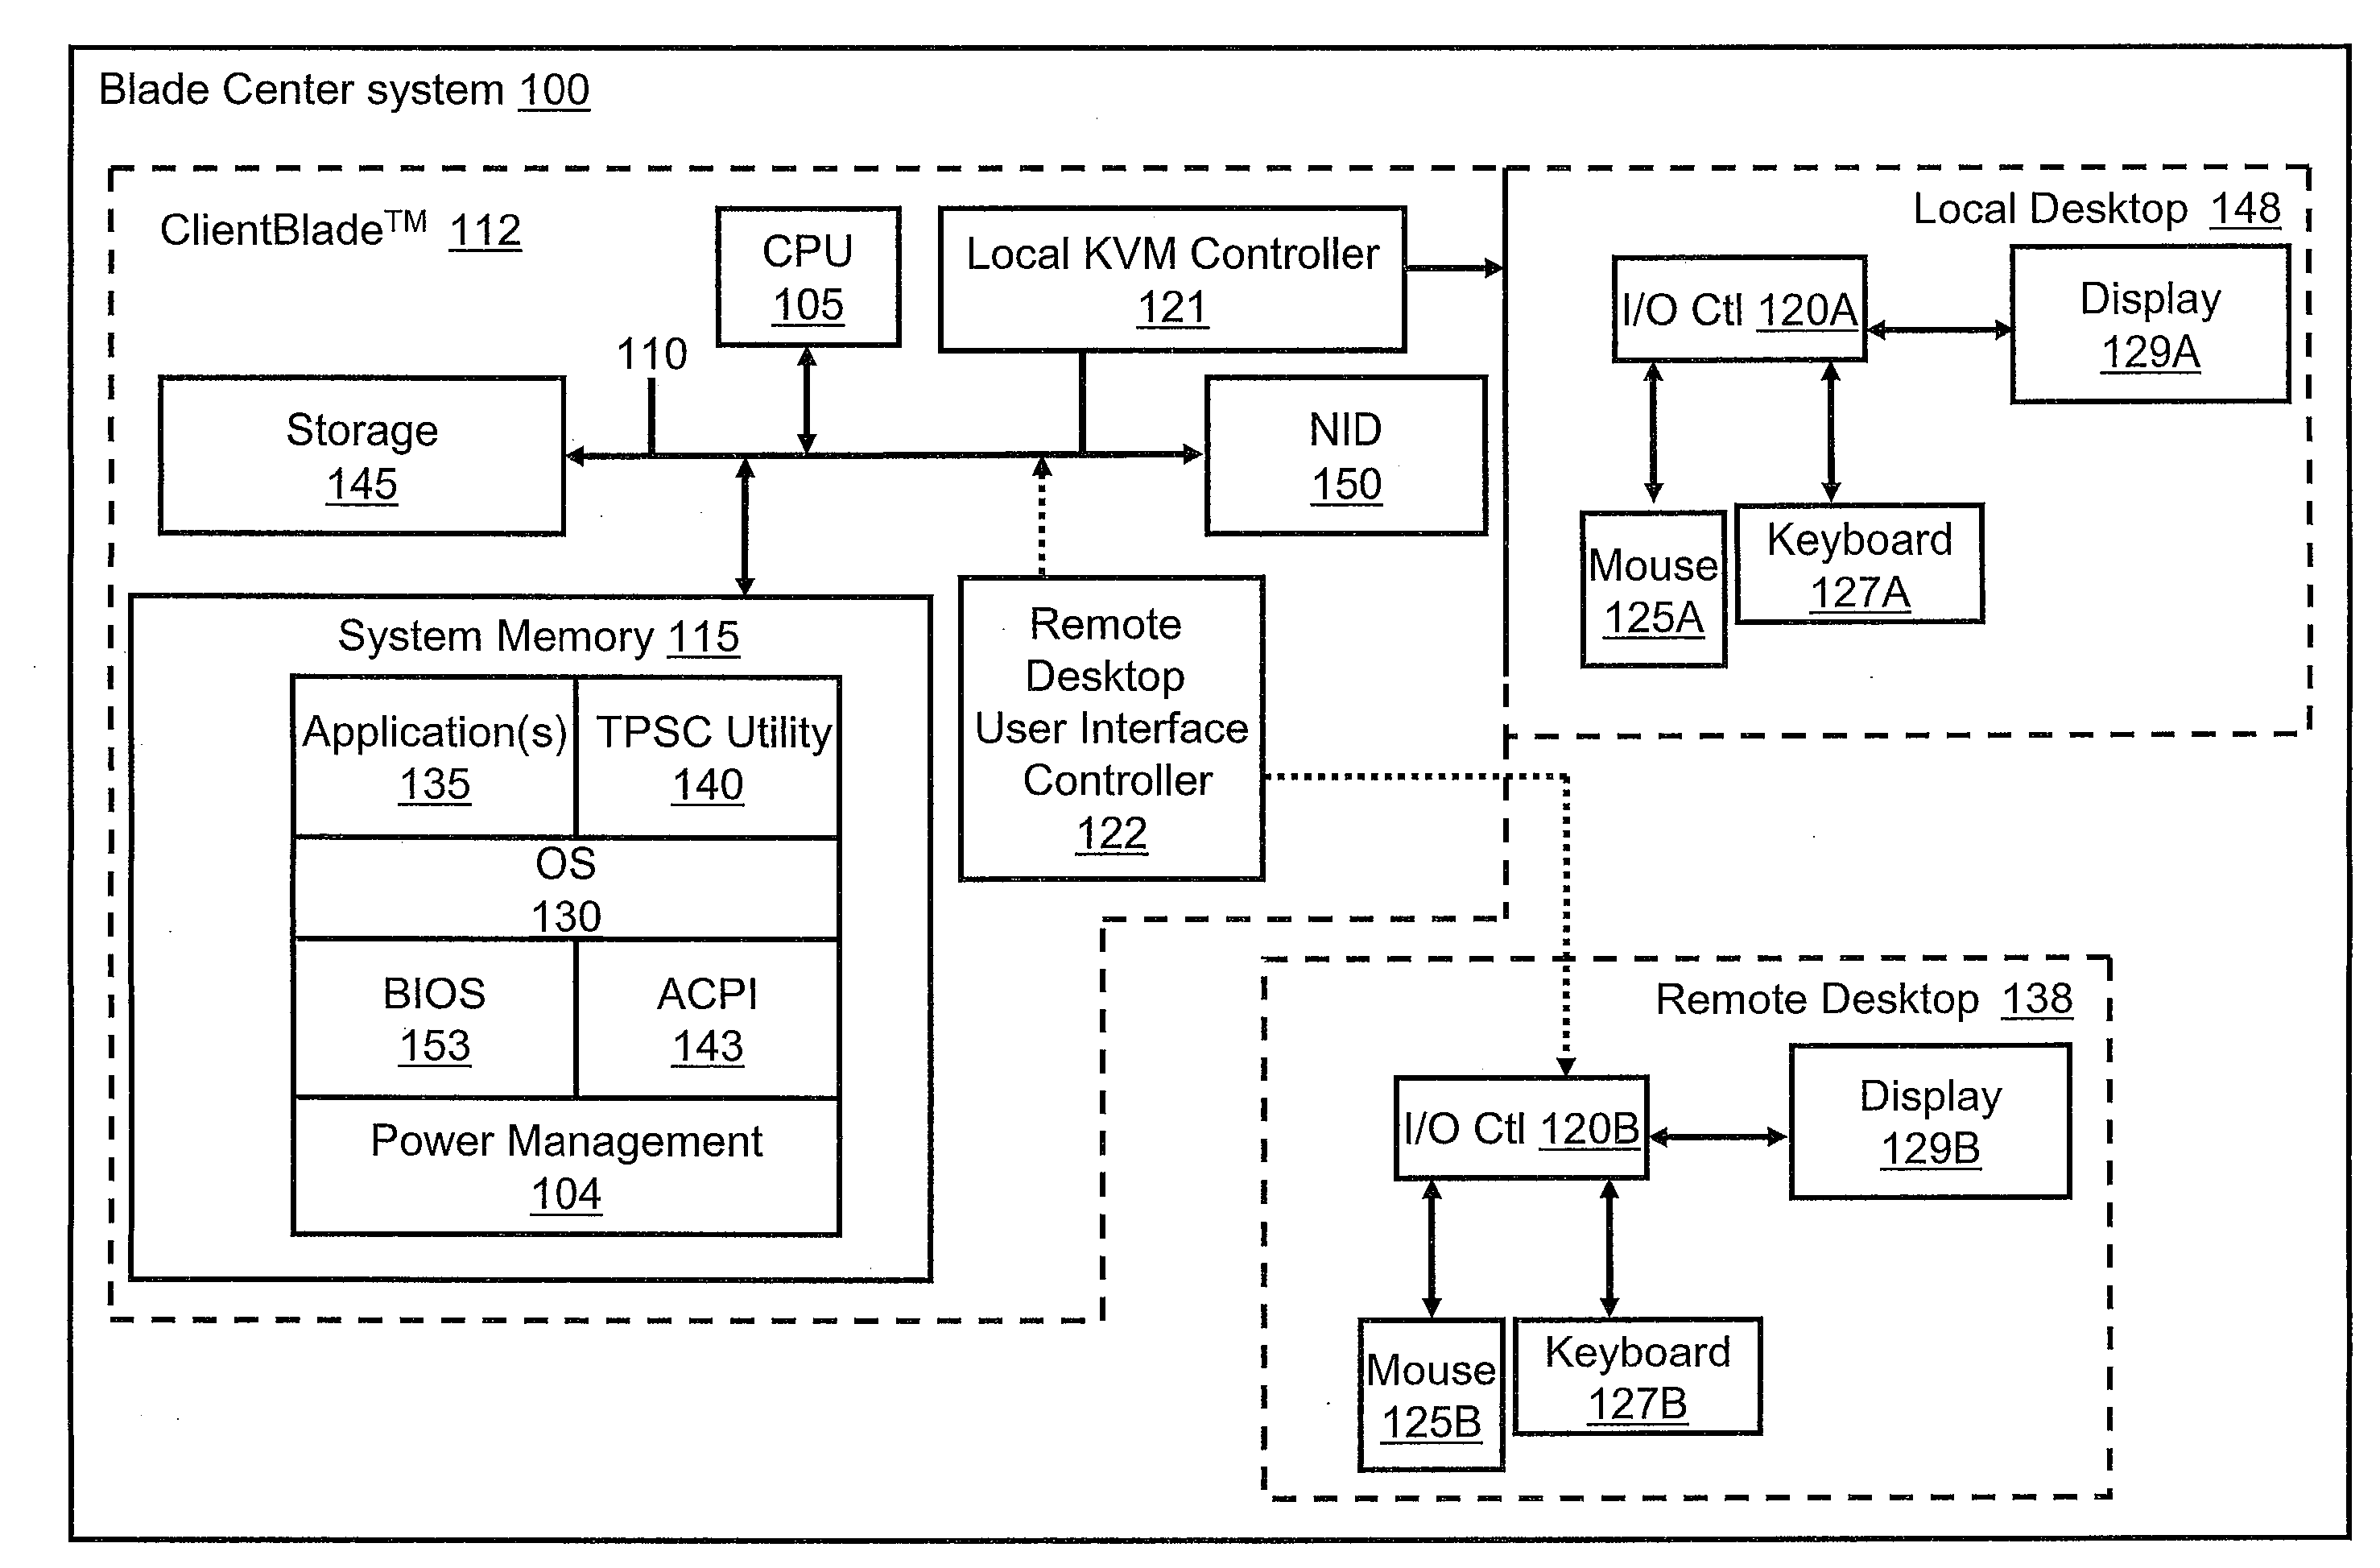 Method of Power State Control for a ClientbladeTM in a BladecenterTM System